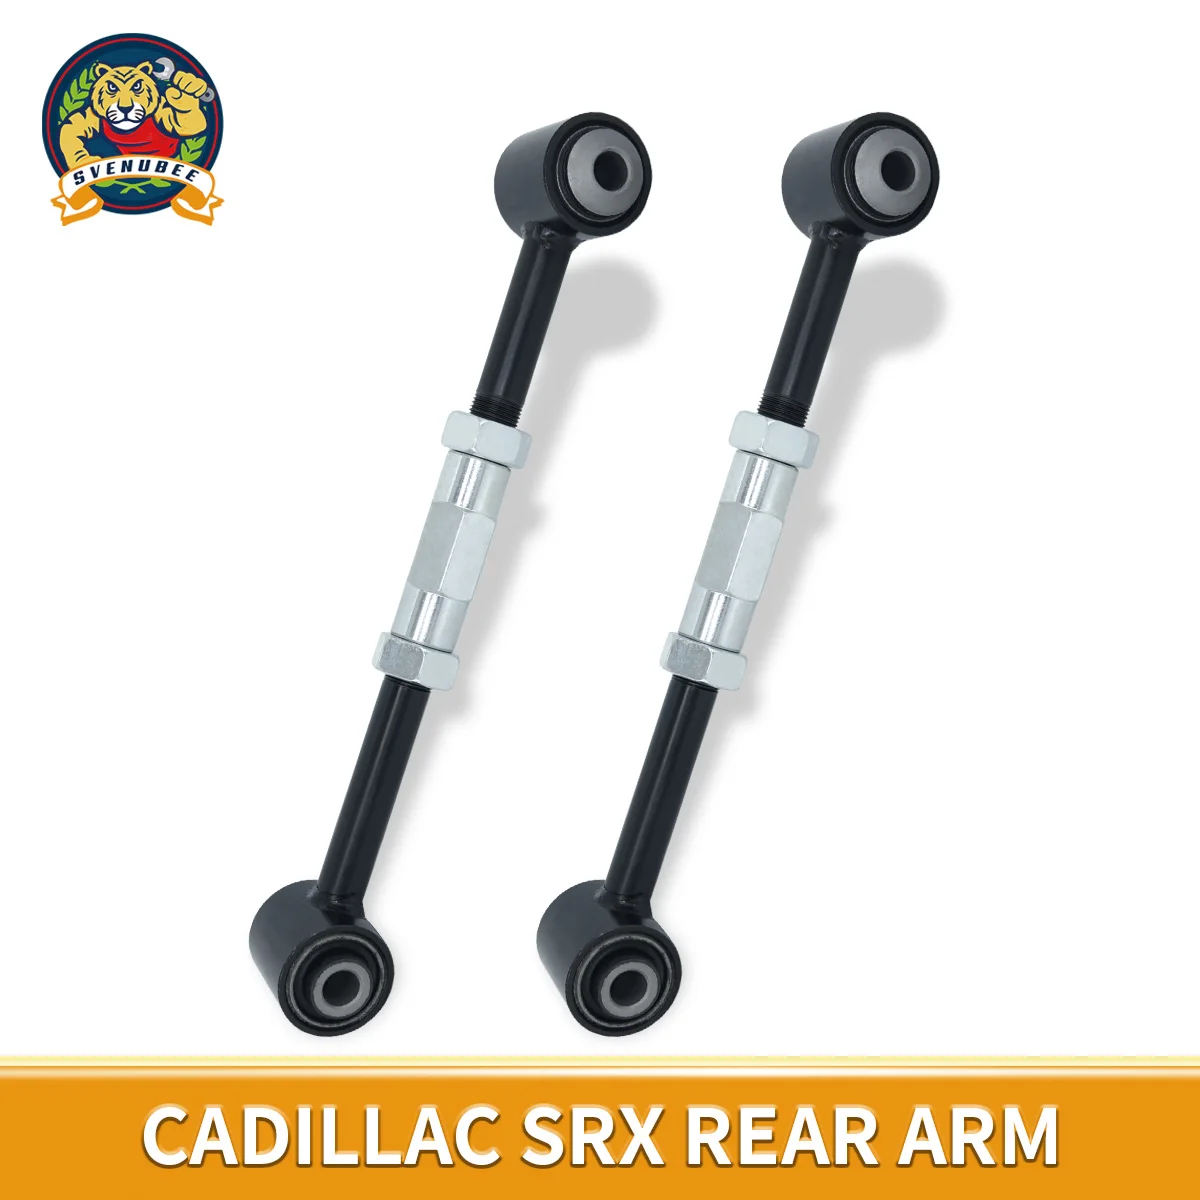 

Svenubee Pair of Rear Lower Control Arms Left & Right Suspension Kit Sets for Cadillac SRX 2010 2011 2012 2013 2014 2015